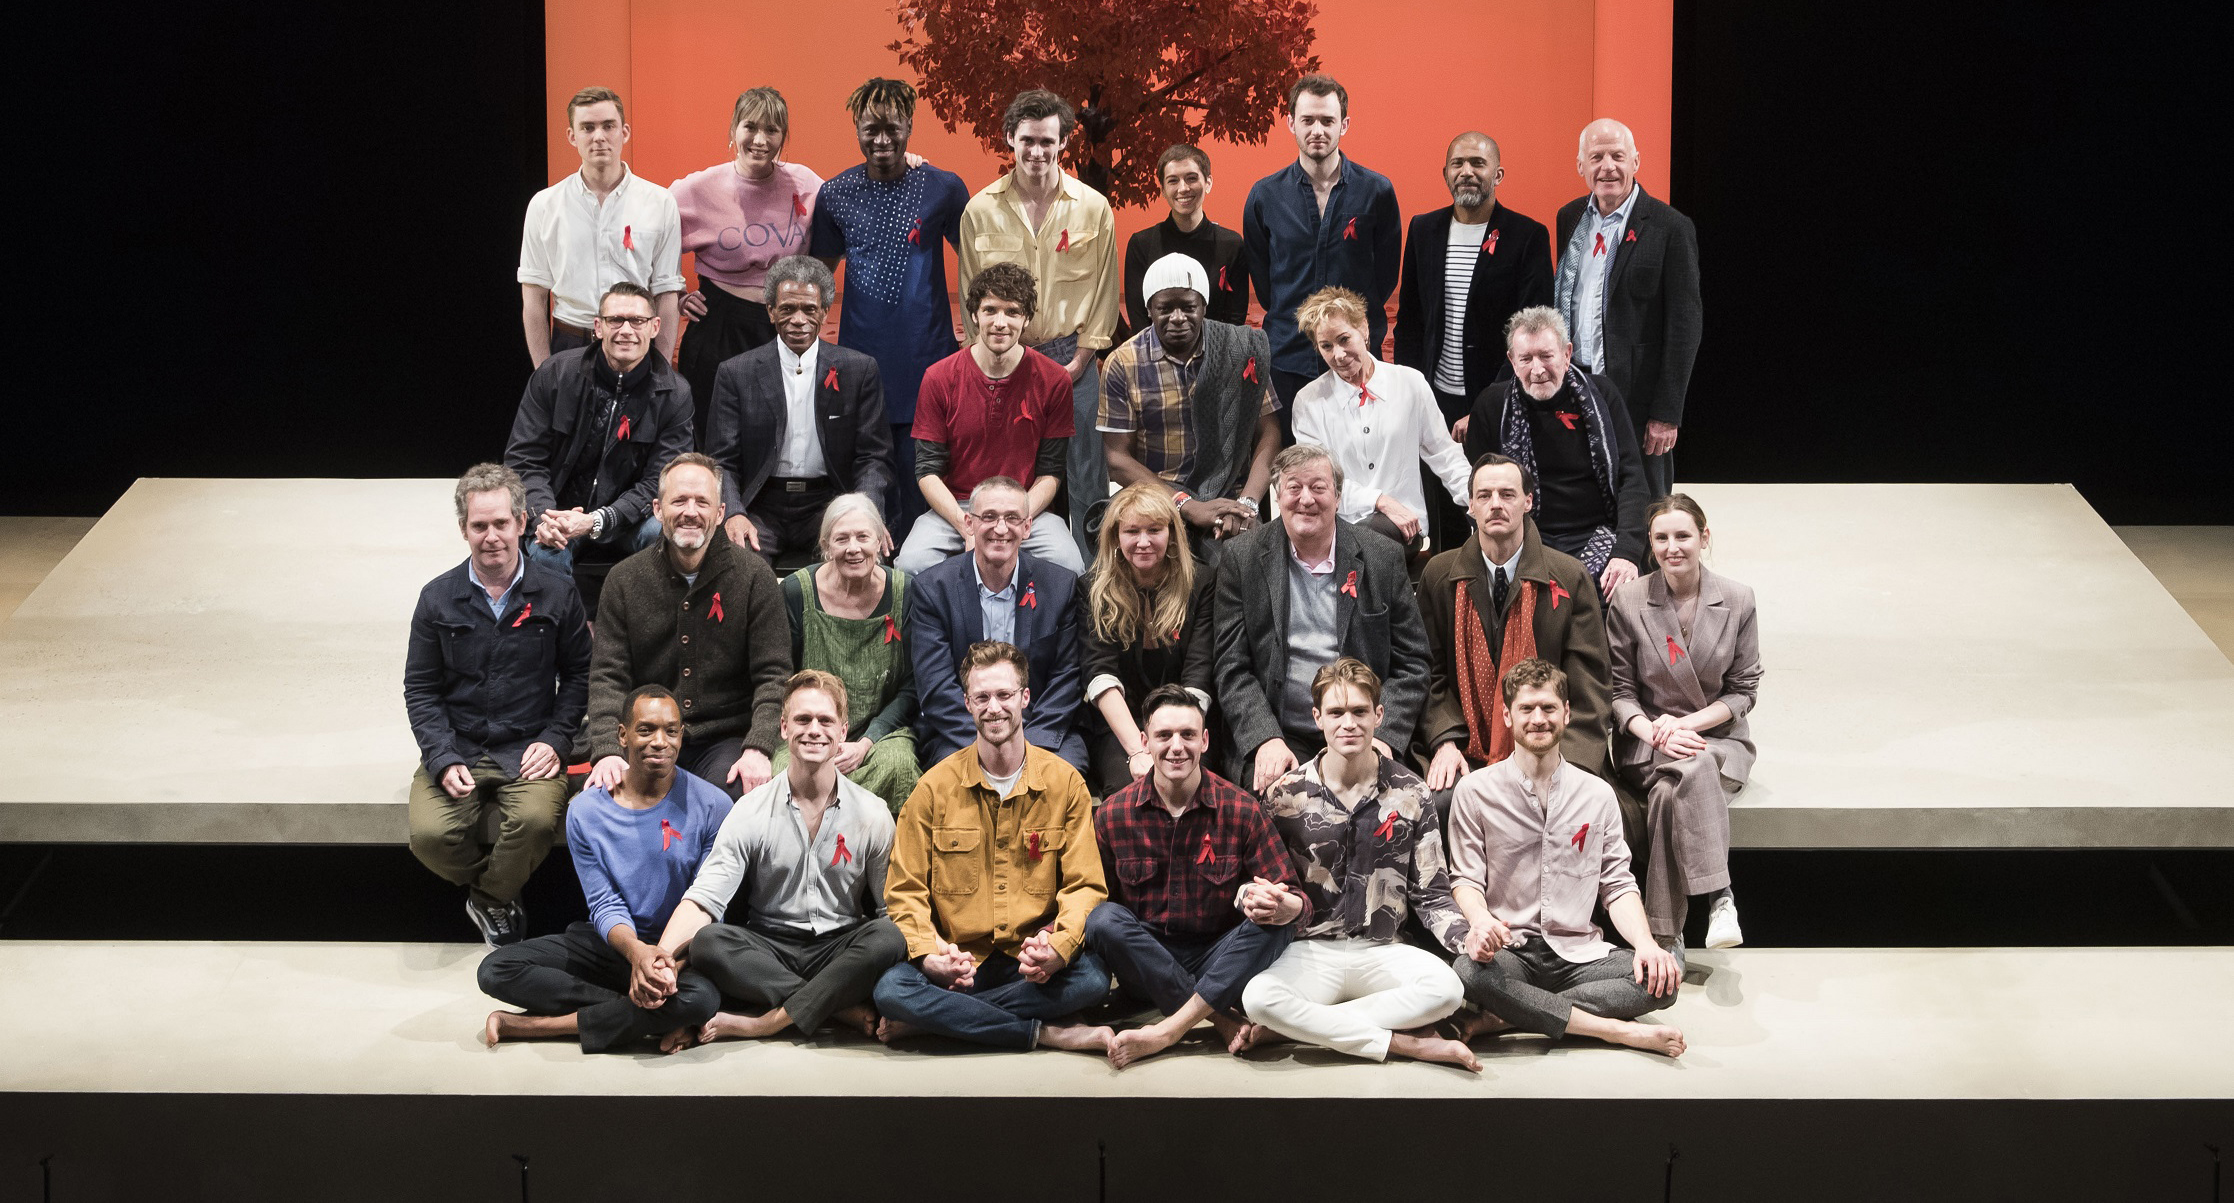 The Inheritance cast, guests and Ian Green on stage on World AIDS Day 2018